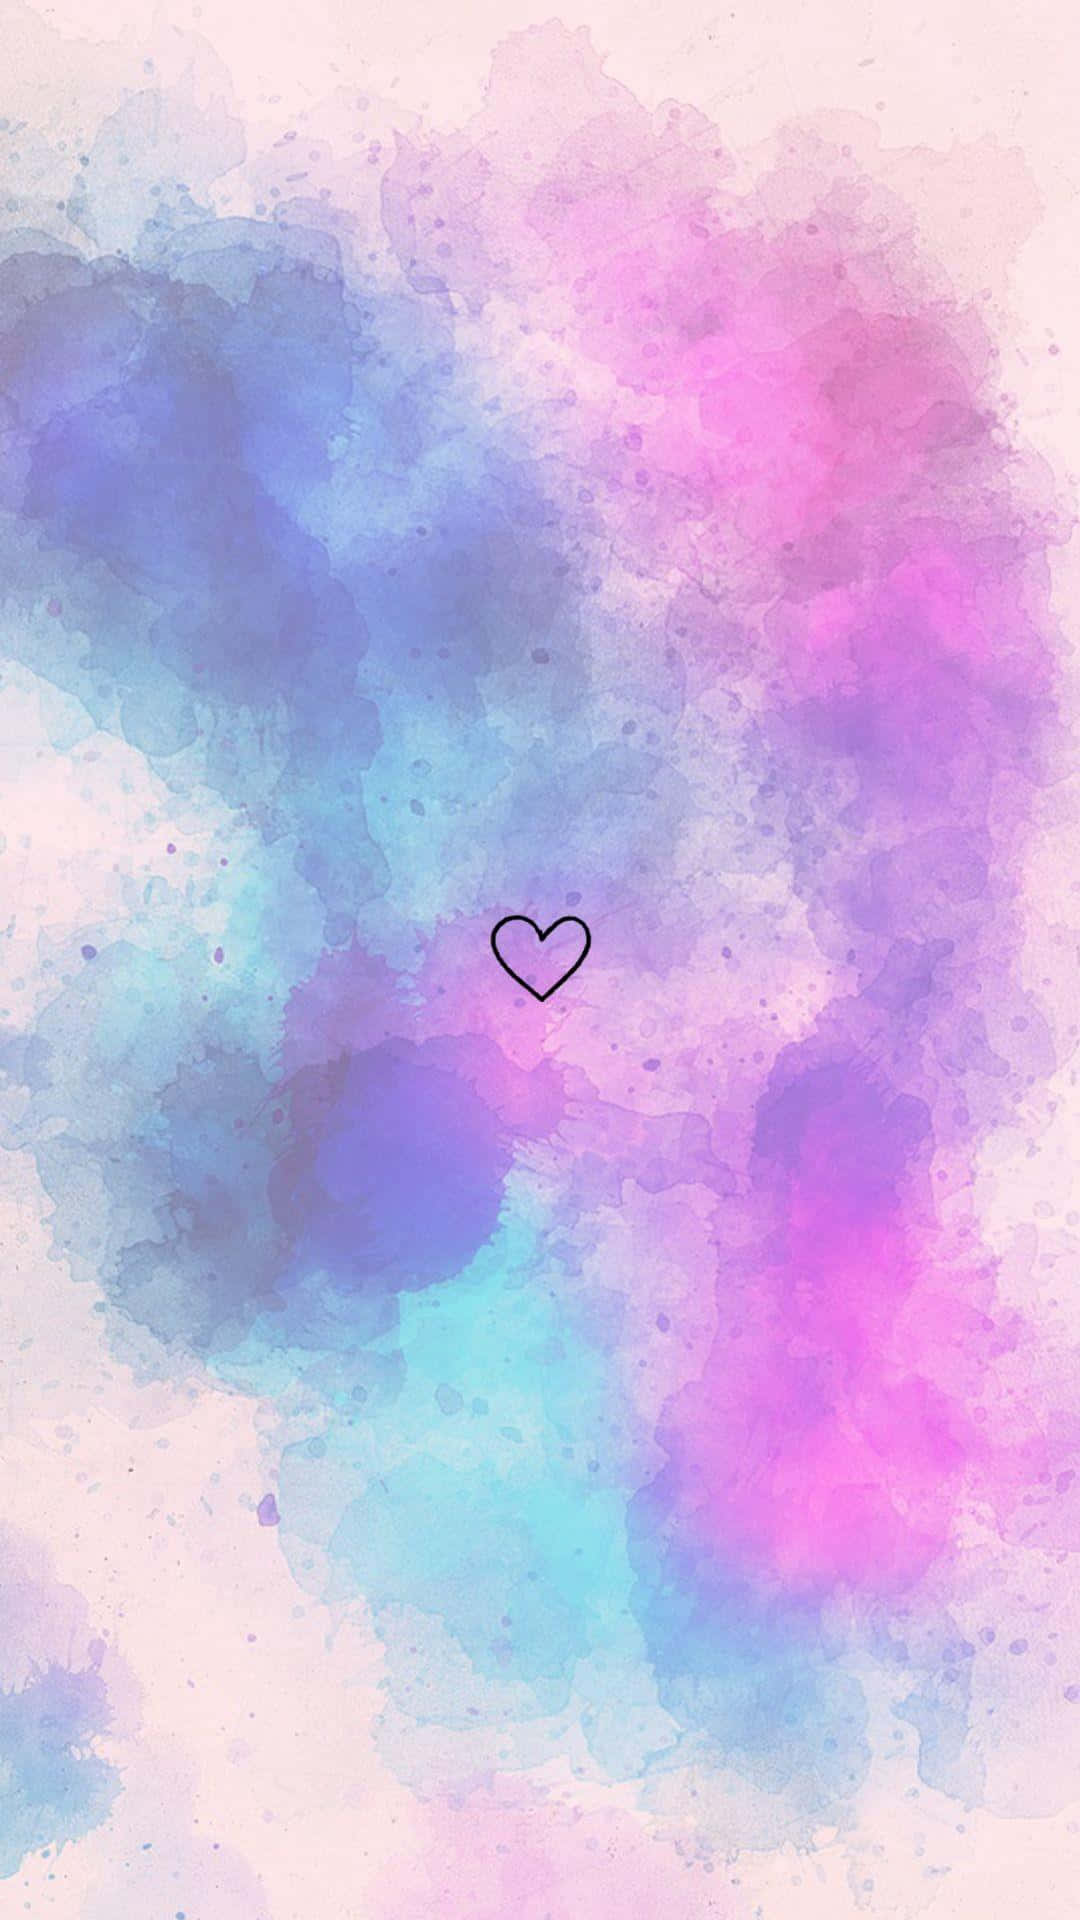 Pastel-colored Smoke For Instagram Stories Wallpaper